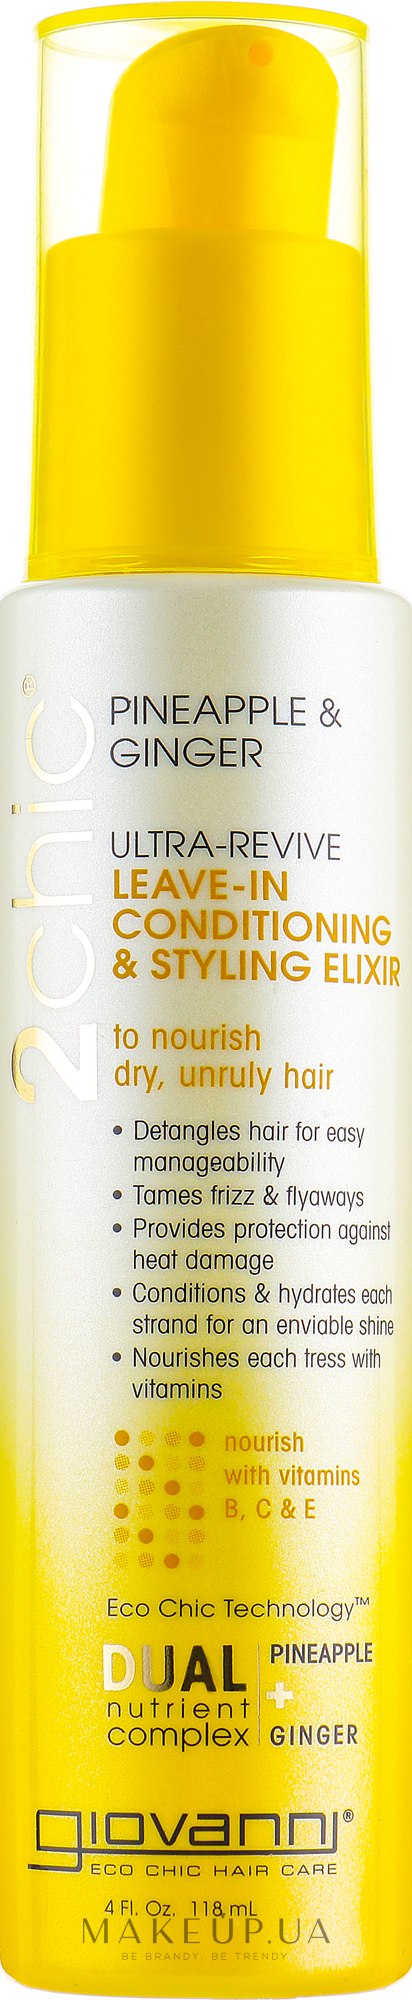 Кондиционер-стайлер для волос - Giovanni 2Chic Ultra-Revive Leave-in Conditioning & Styling Elixir Dry or Unruly Hair — фото 118ml